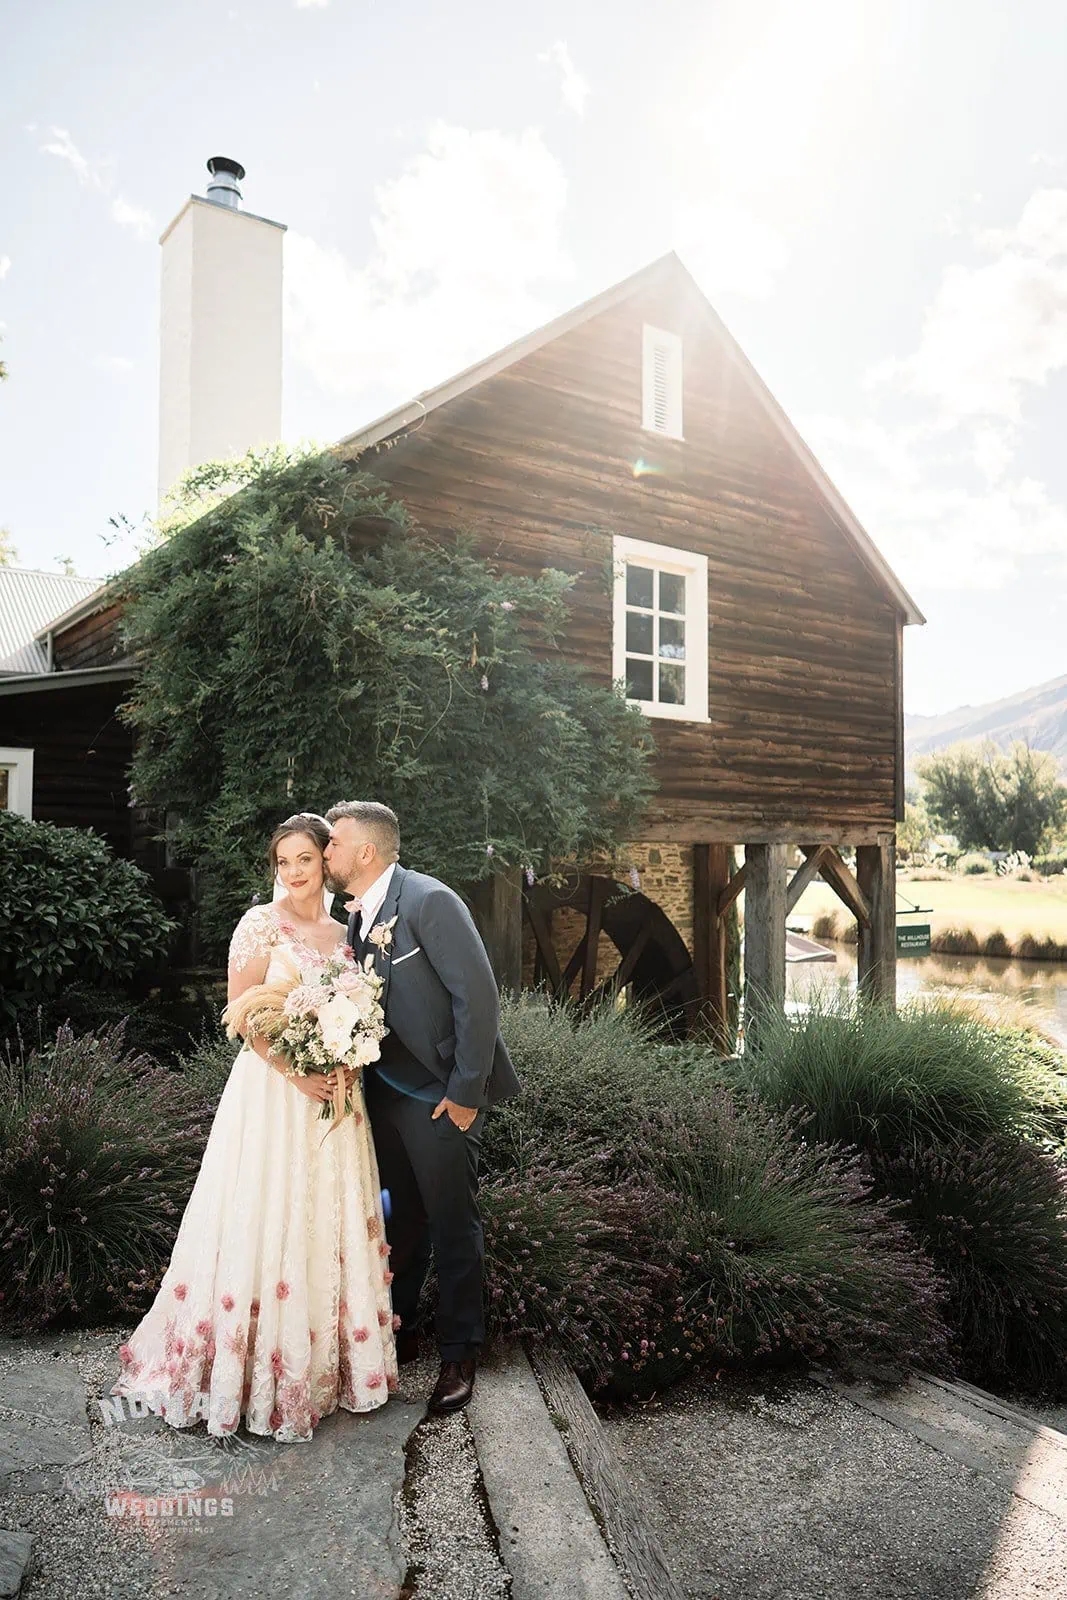 Queenstown New Zealand Elopement Wedding Photographer - A bride and groom standing in front of a barn.